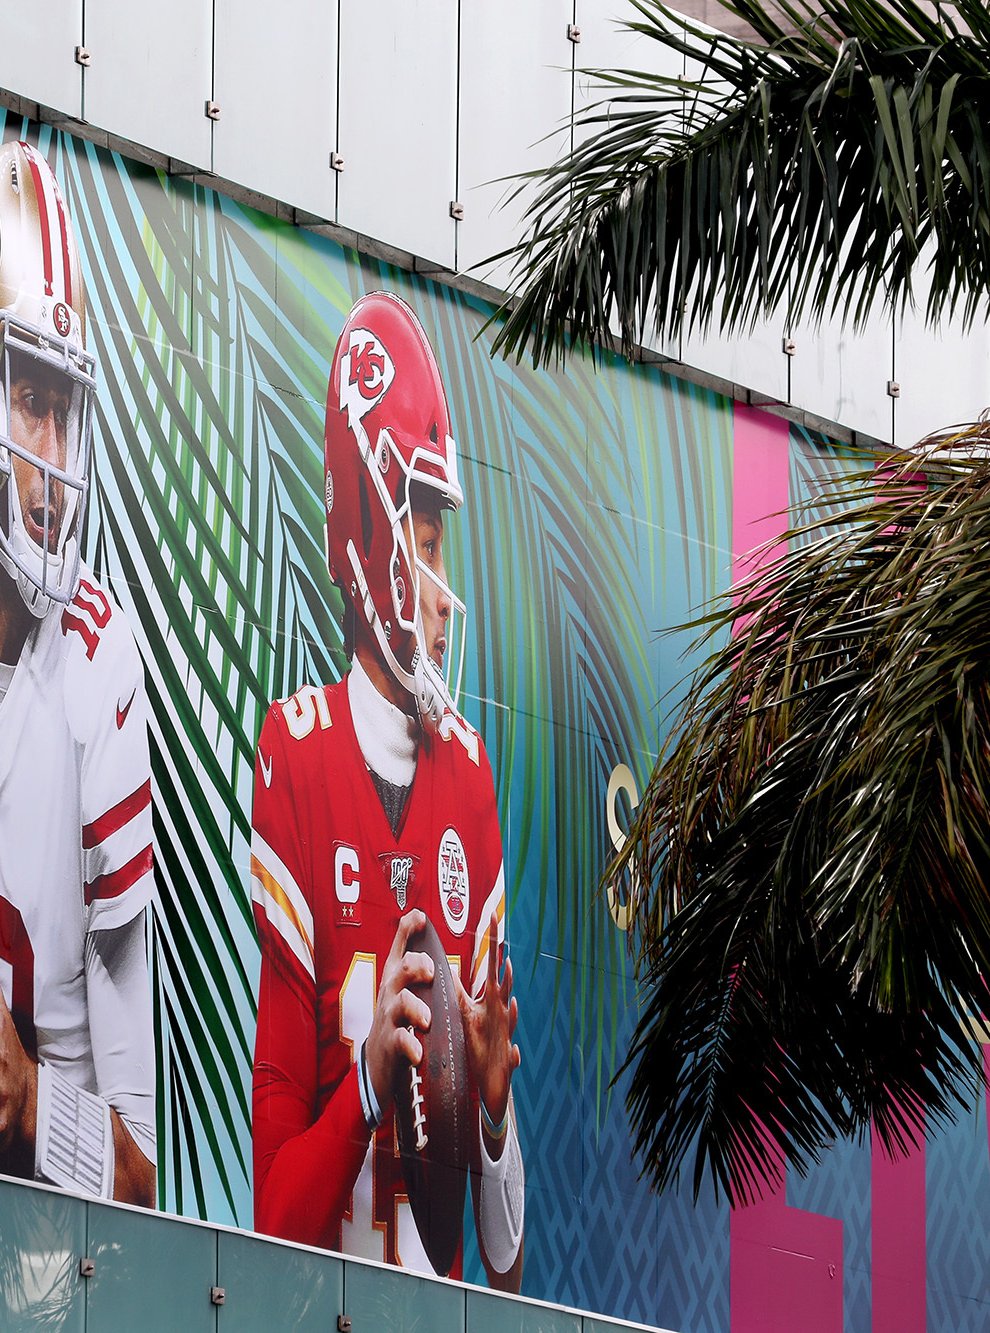 Miami gets ready for the Super Bowl between San Francisco 49ers and the Kansas City Chiefs